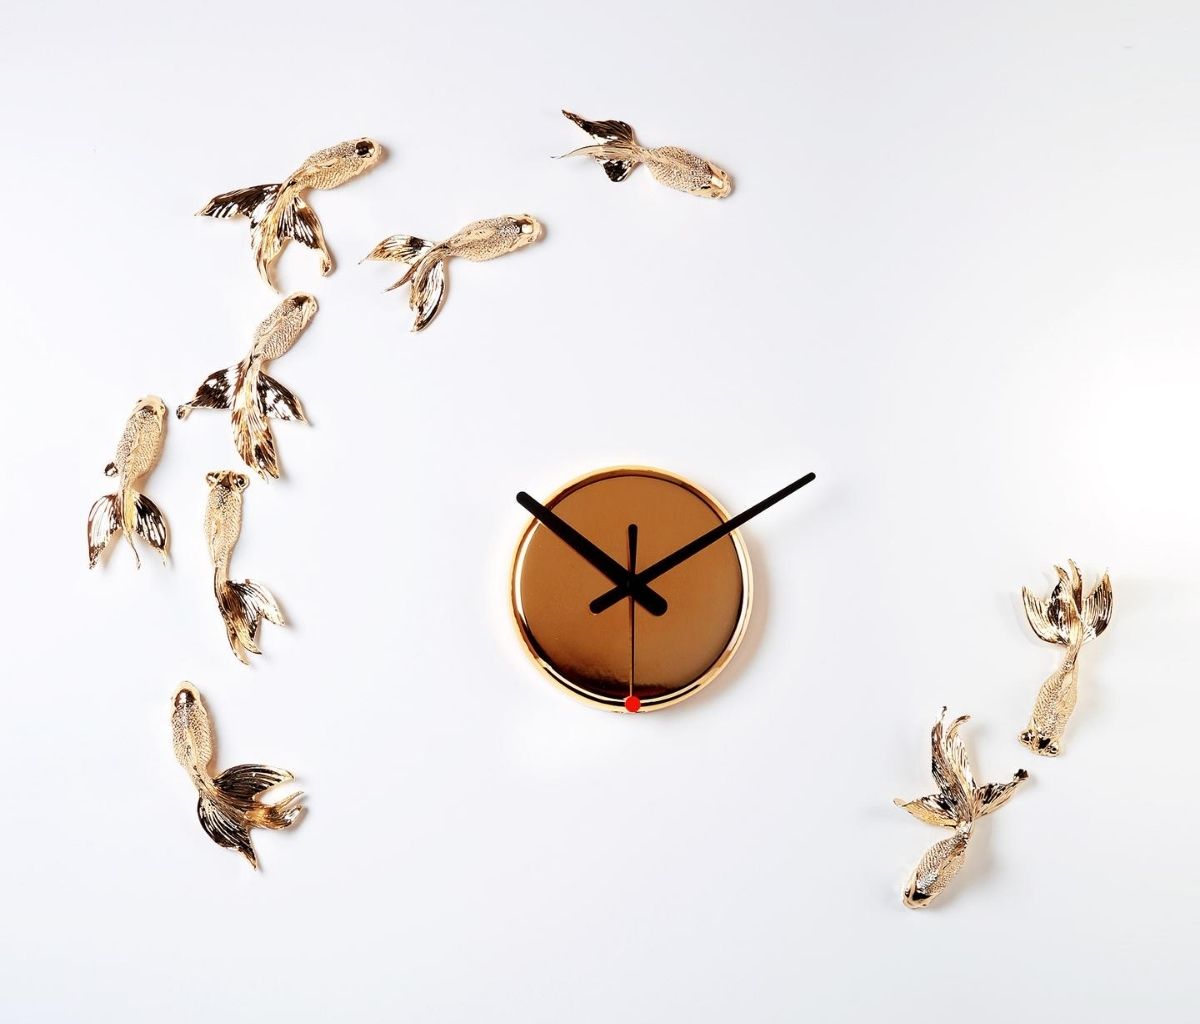 This fishing gift themed modern wall clock will enchant you